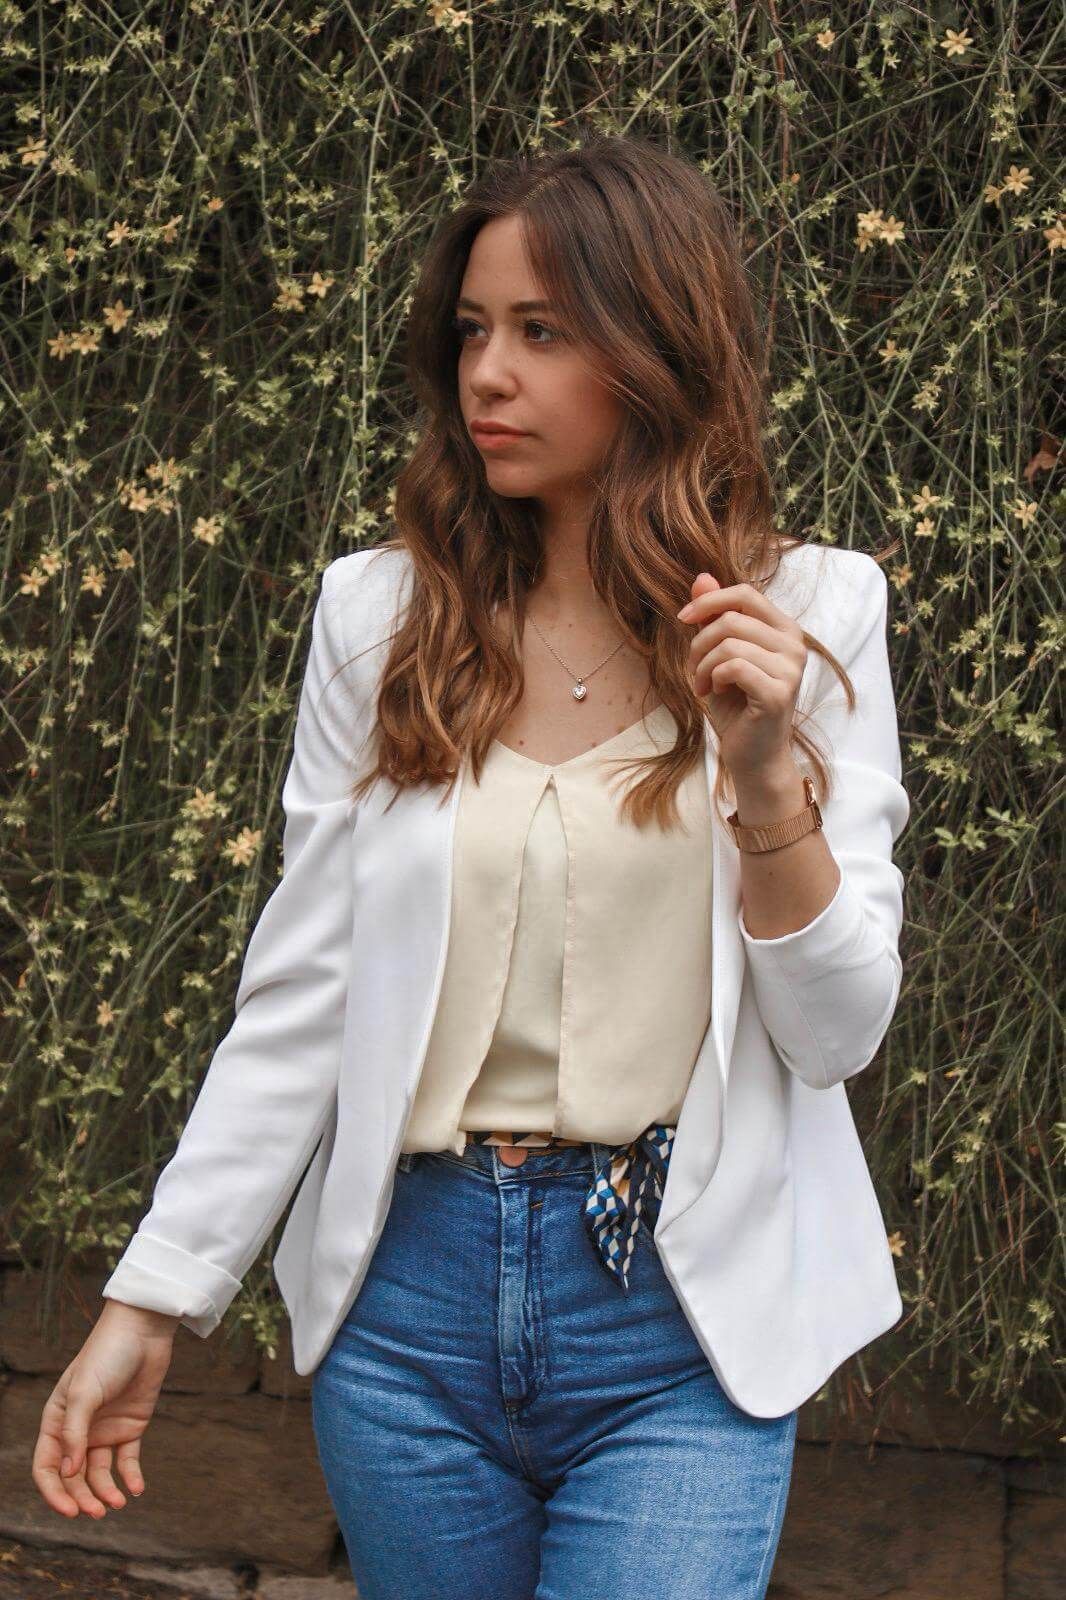 How do we combine the casual chic look ! White blazer, jeans and sneakers